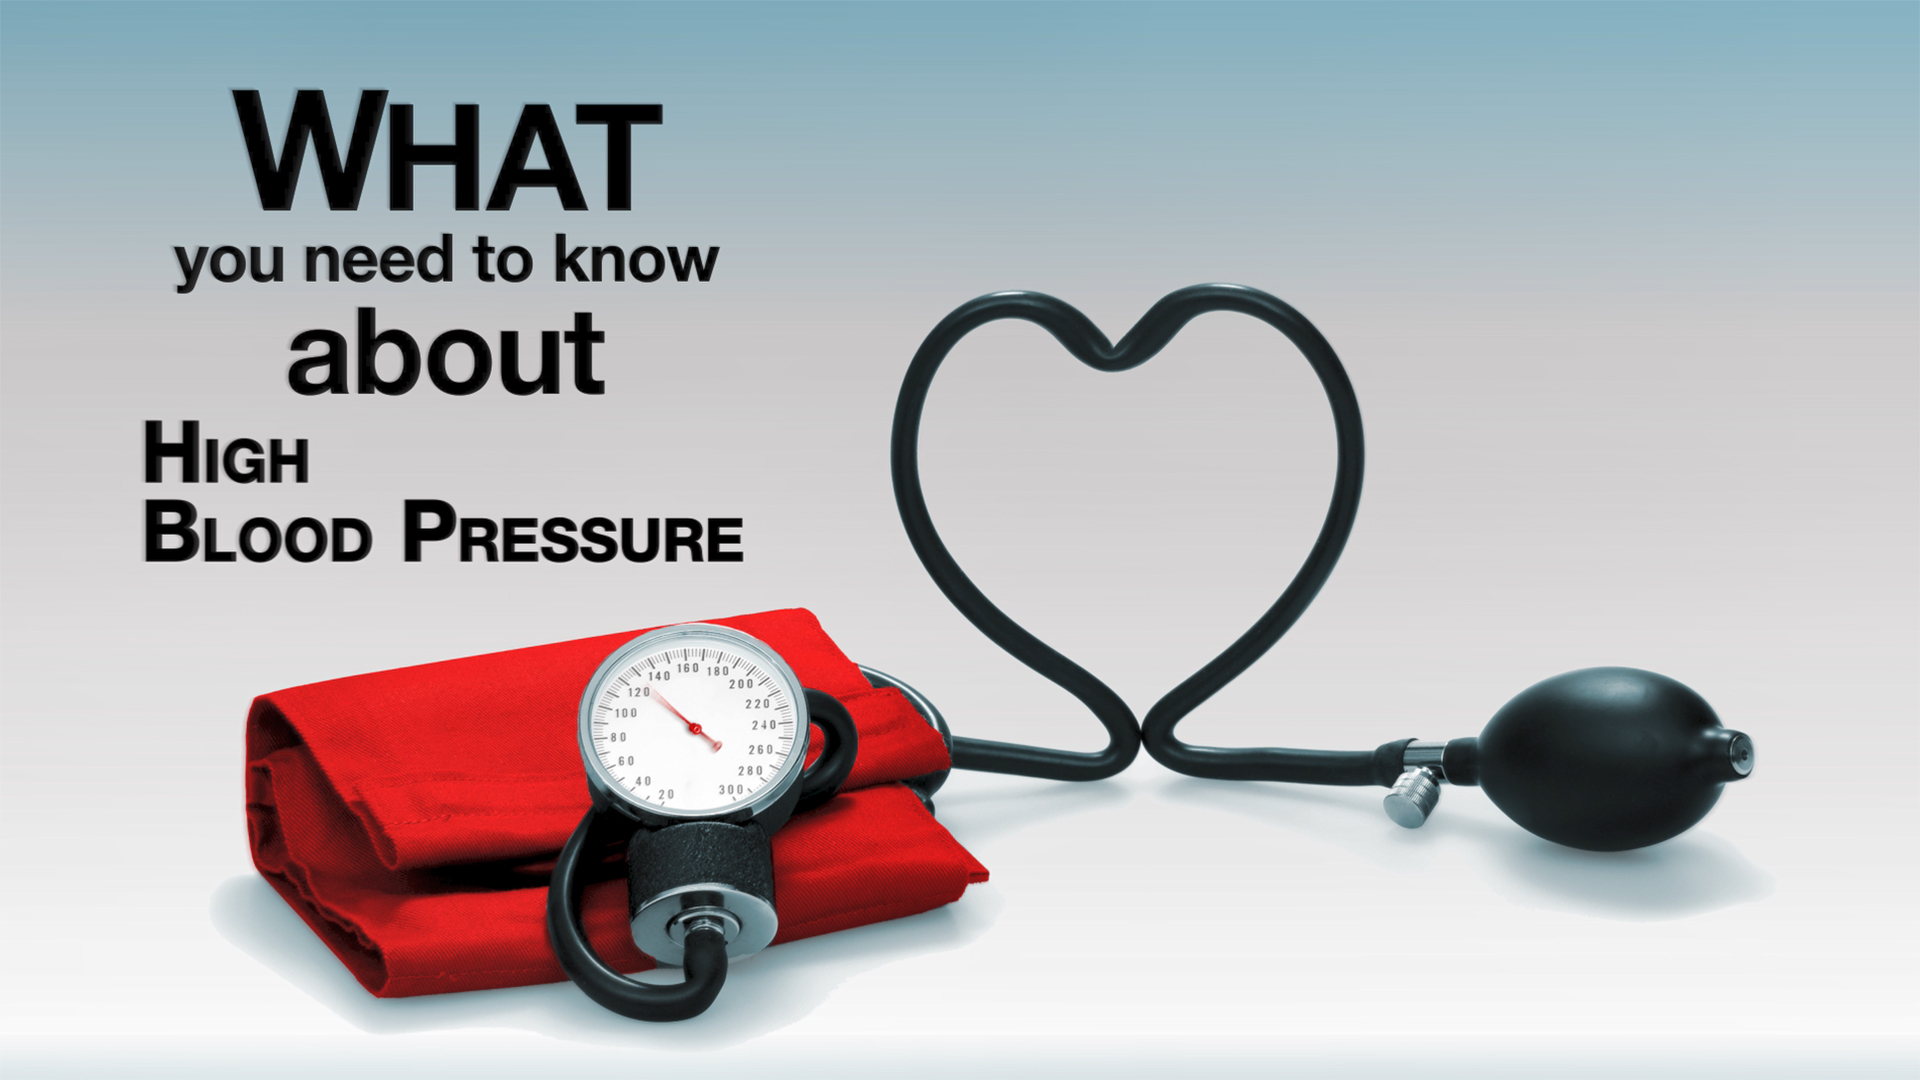 What You Need To Know About High Blood Pressure (:45). CDC TV